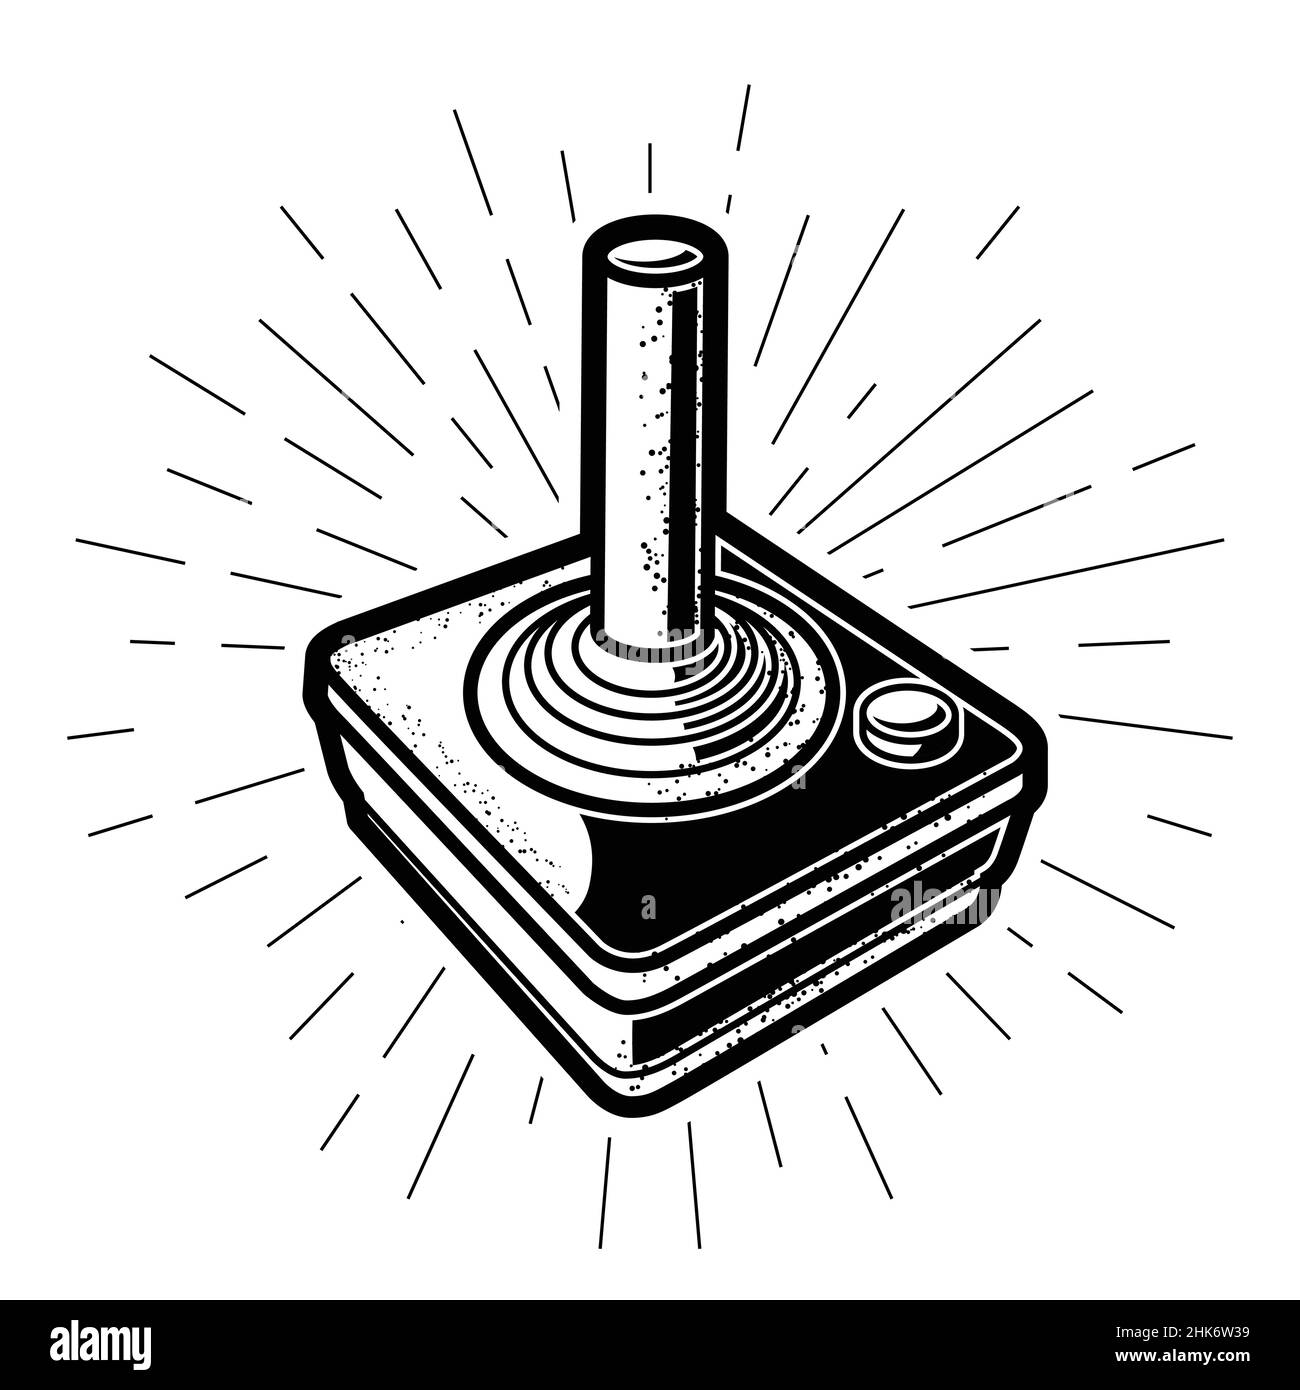 Retro joystick icon, old gamepad with stick, vintage game controller with handle, vector Stock Vector